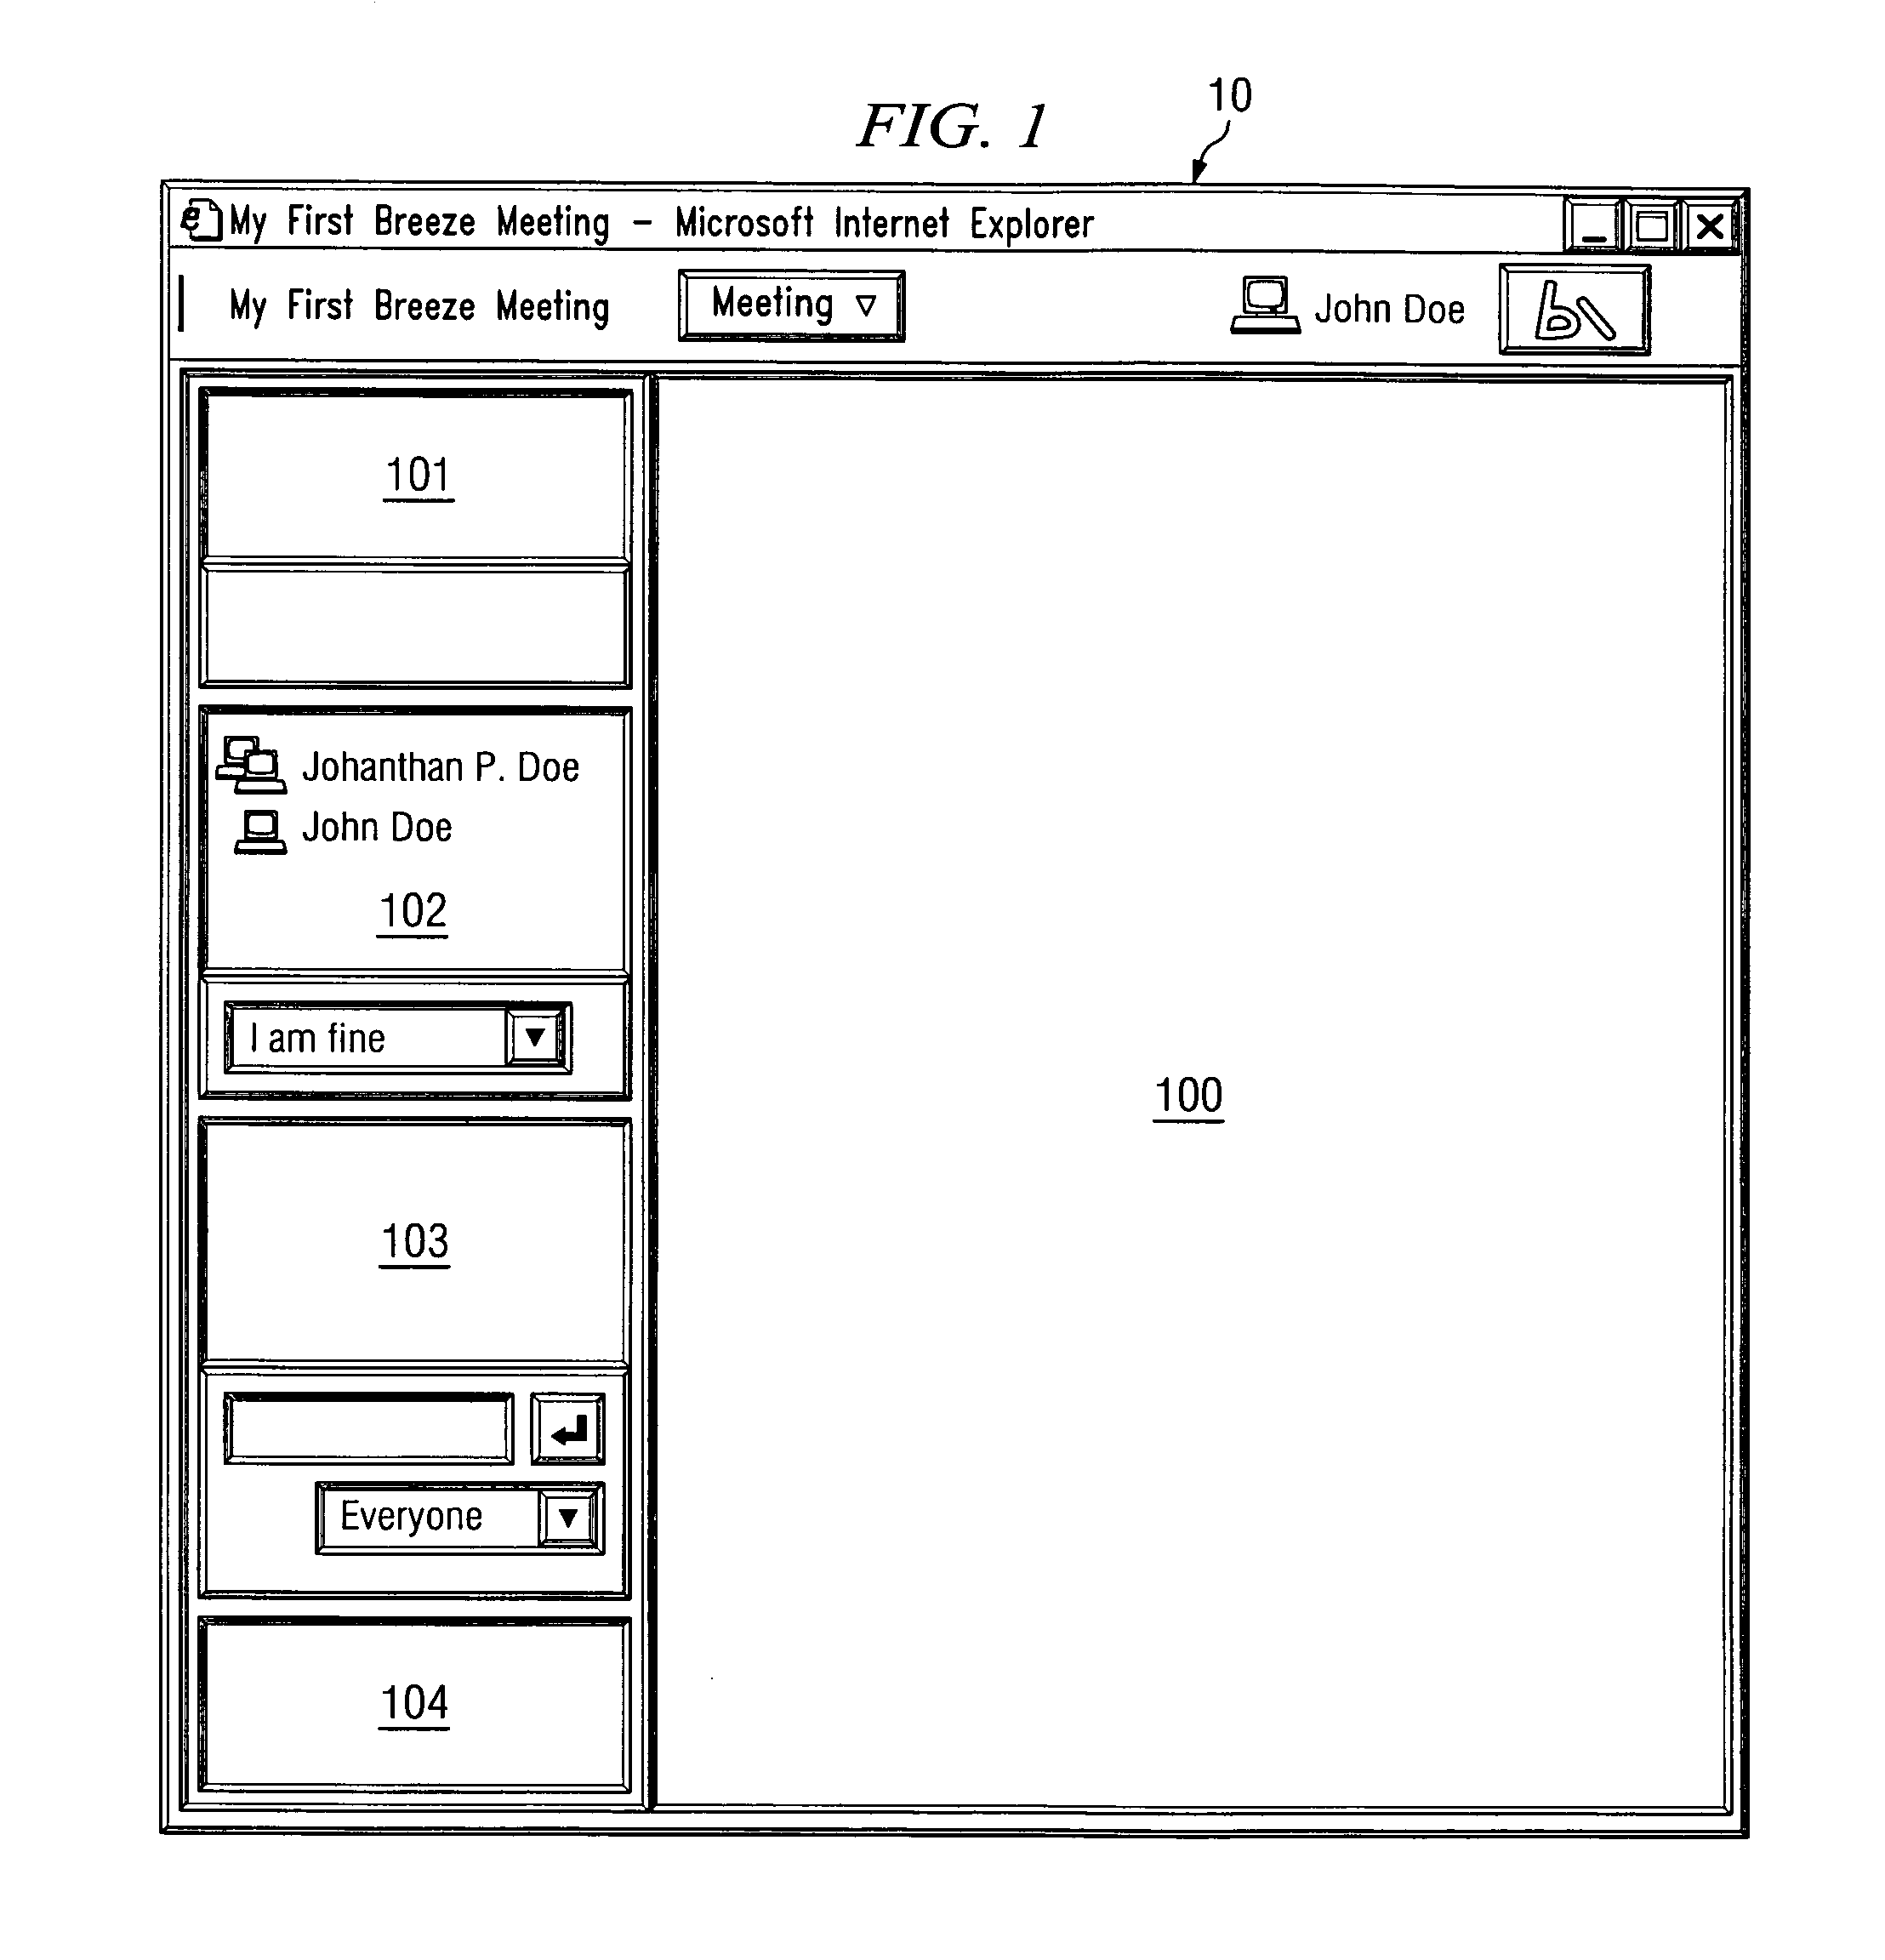 System and method for archiving collaborative electronic meetings